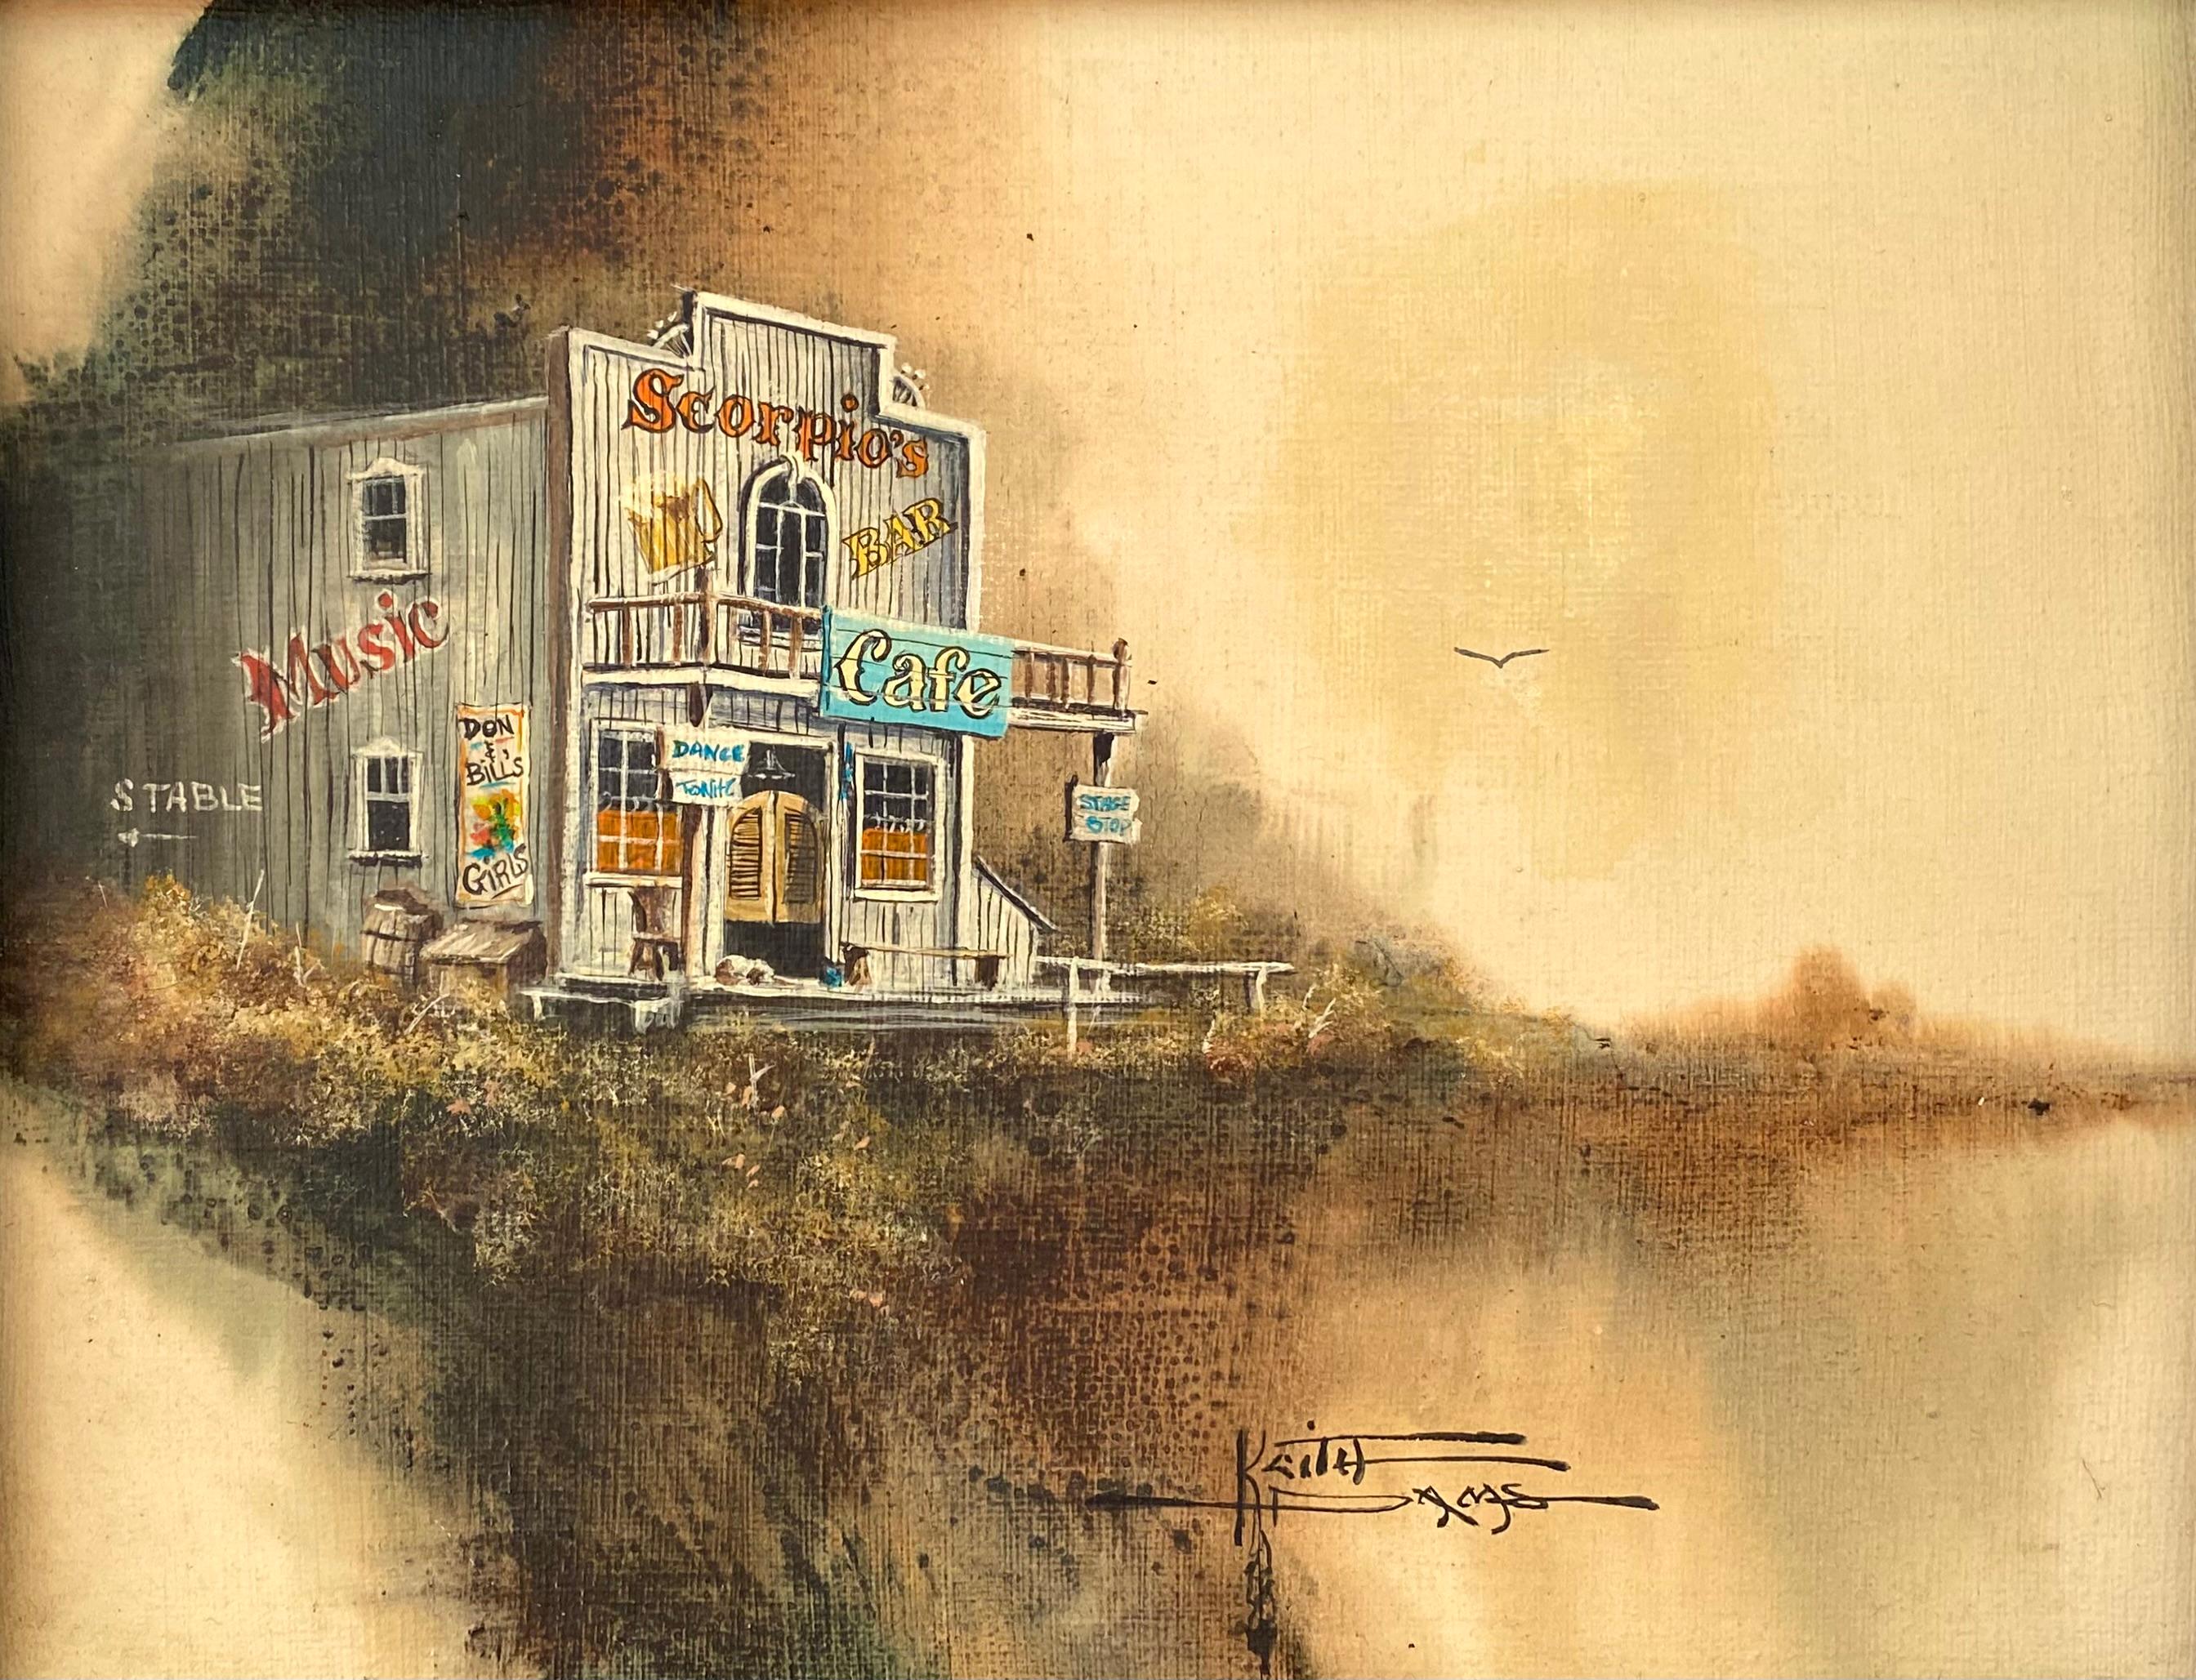 “Scorpio’s Bar and Cafe” - Contemporary Painting by Keith Holmes